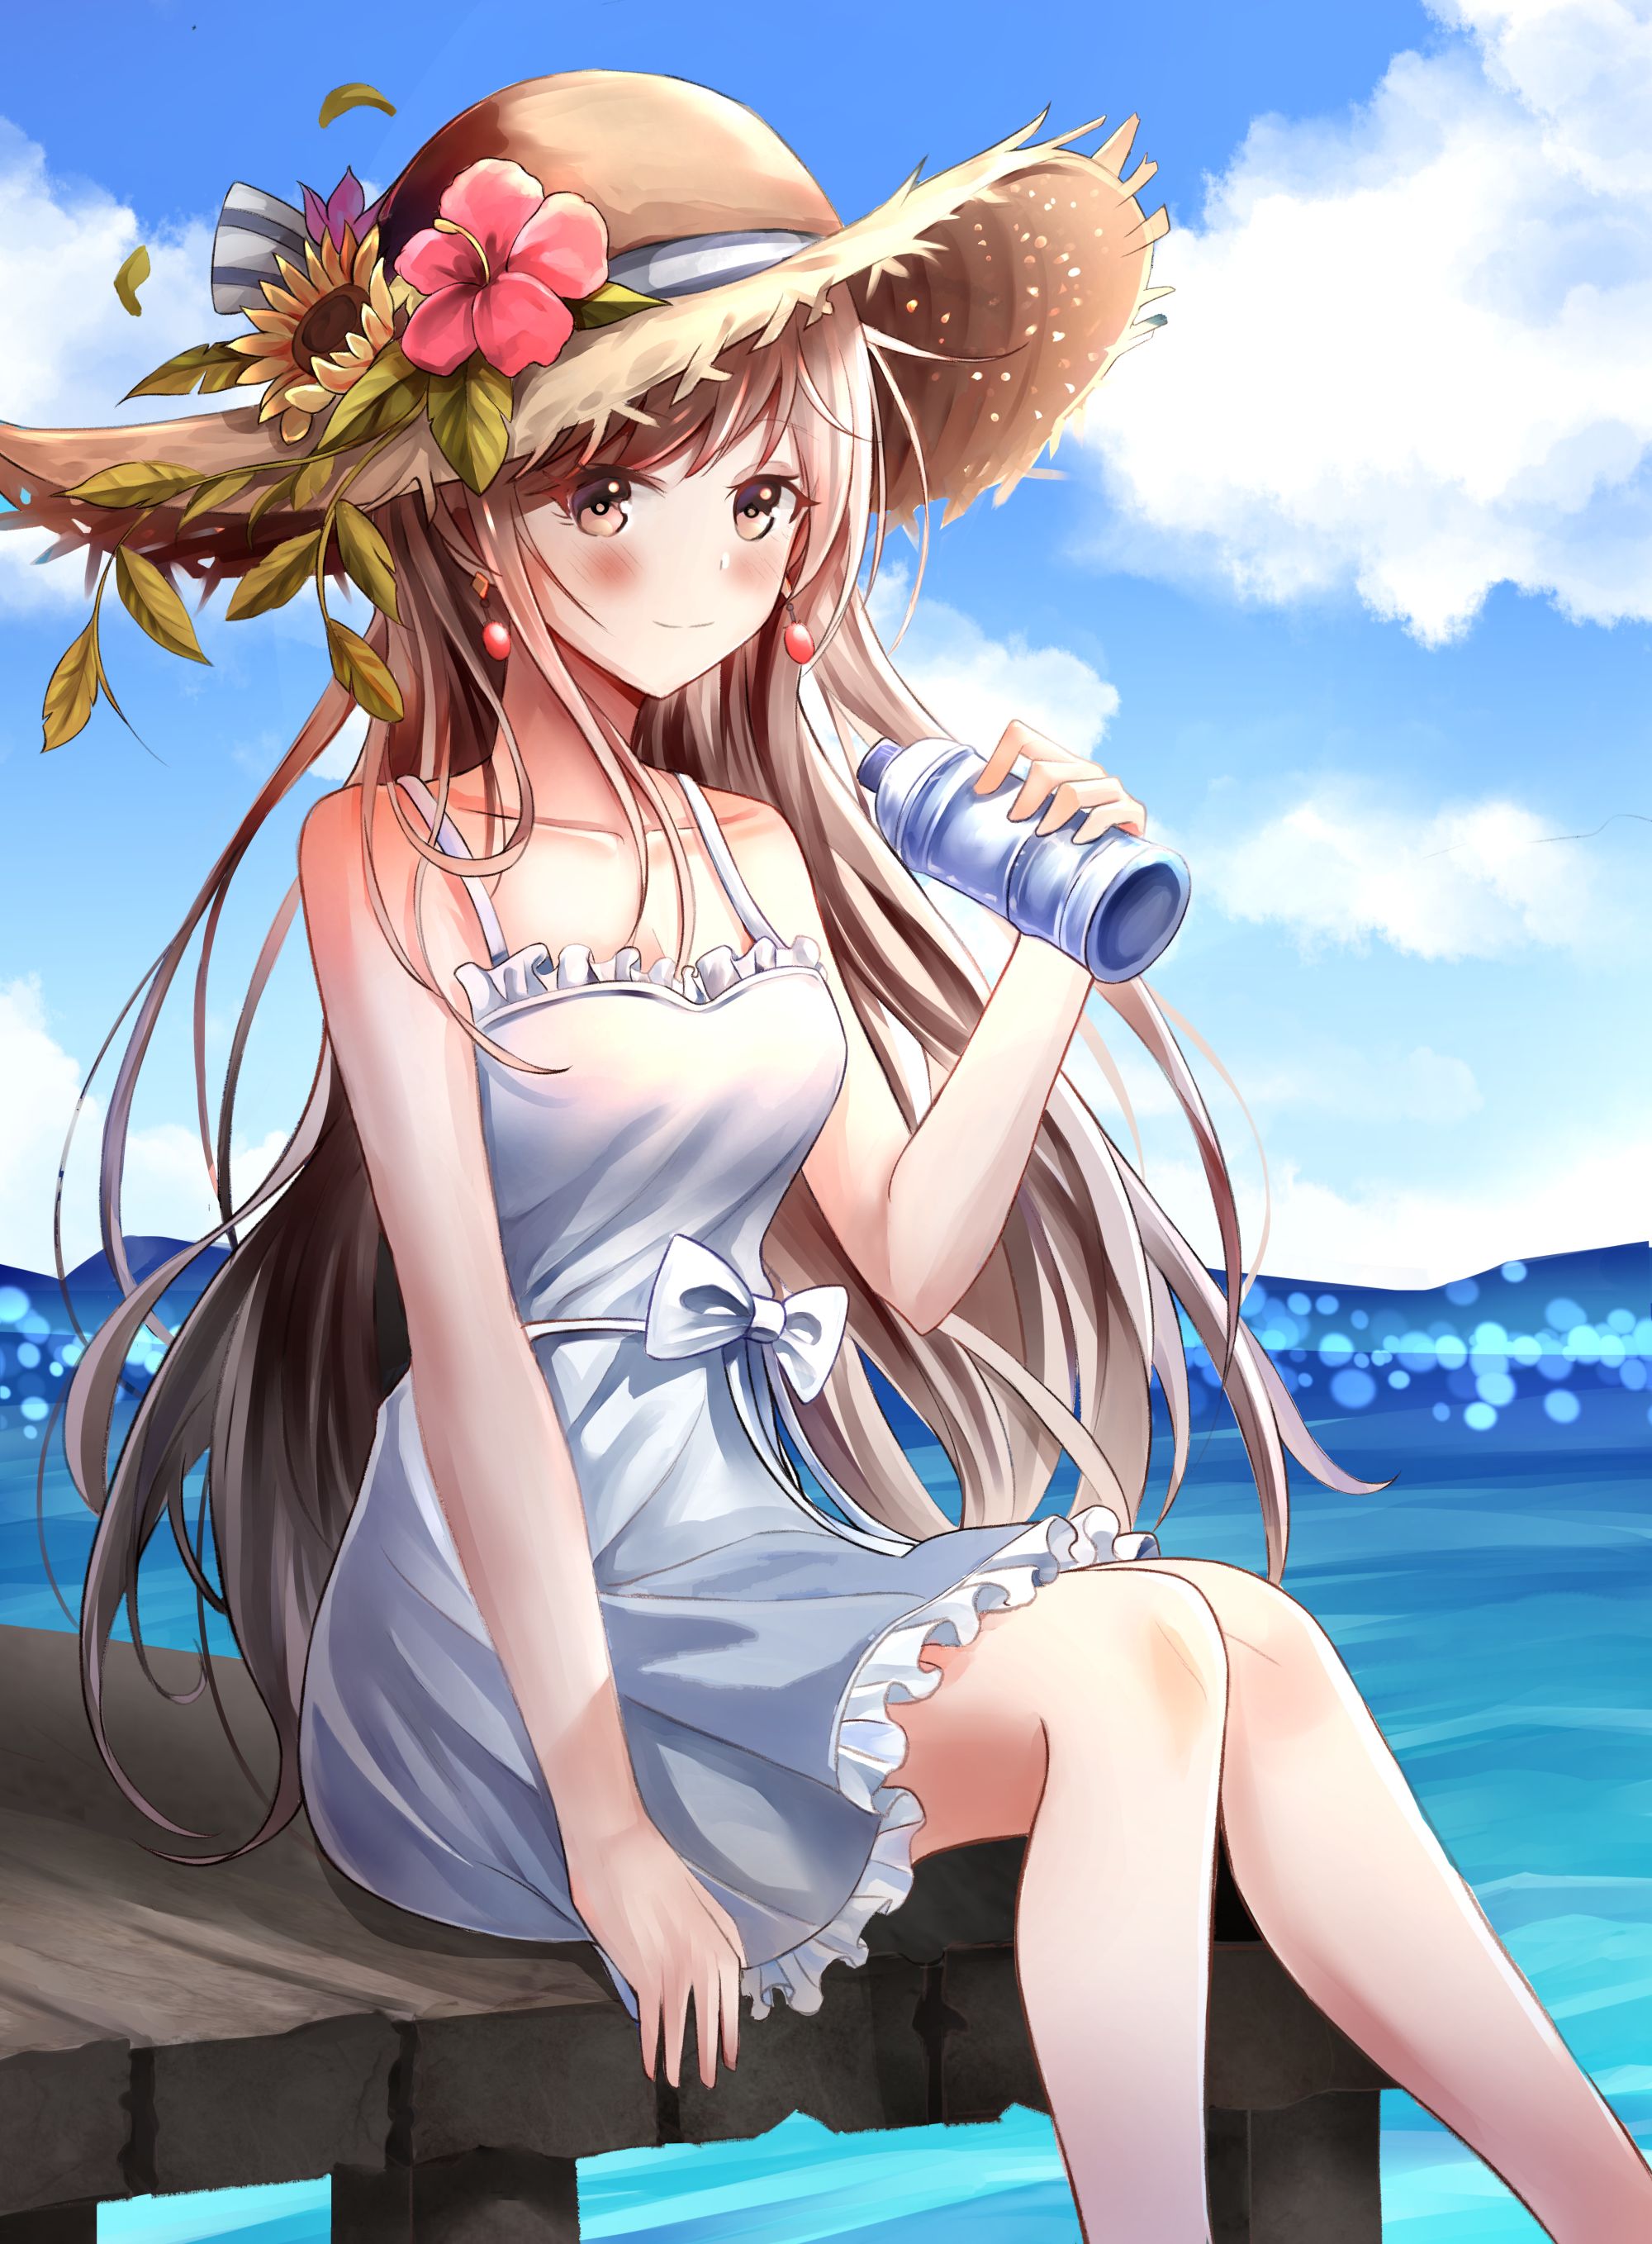 anime, girl, art, hat, outfit, attire